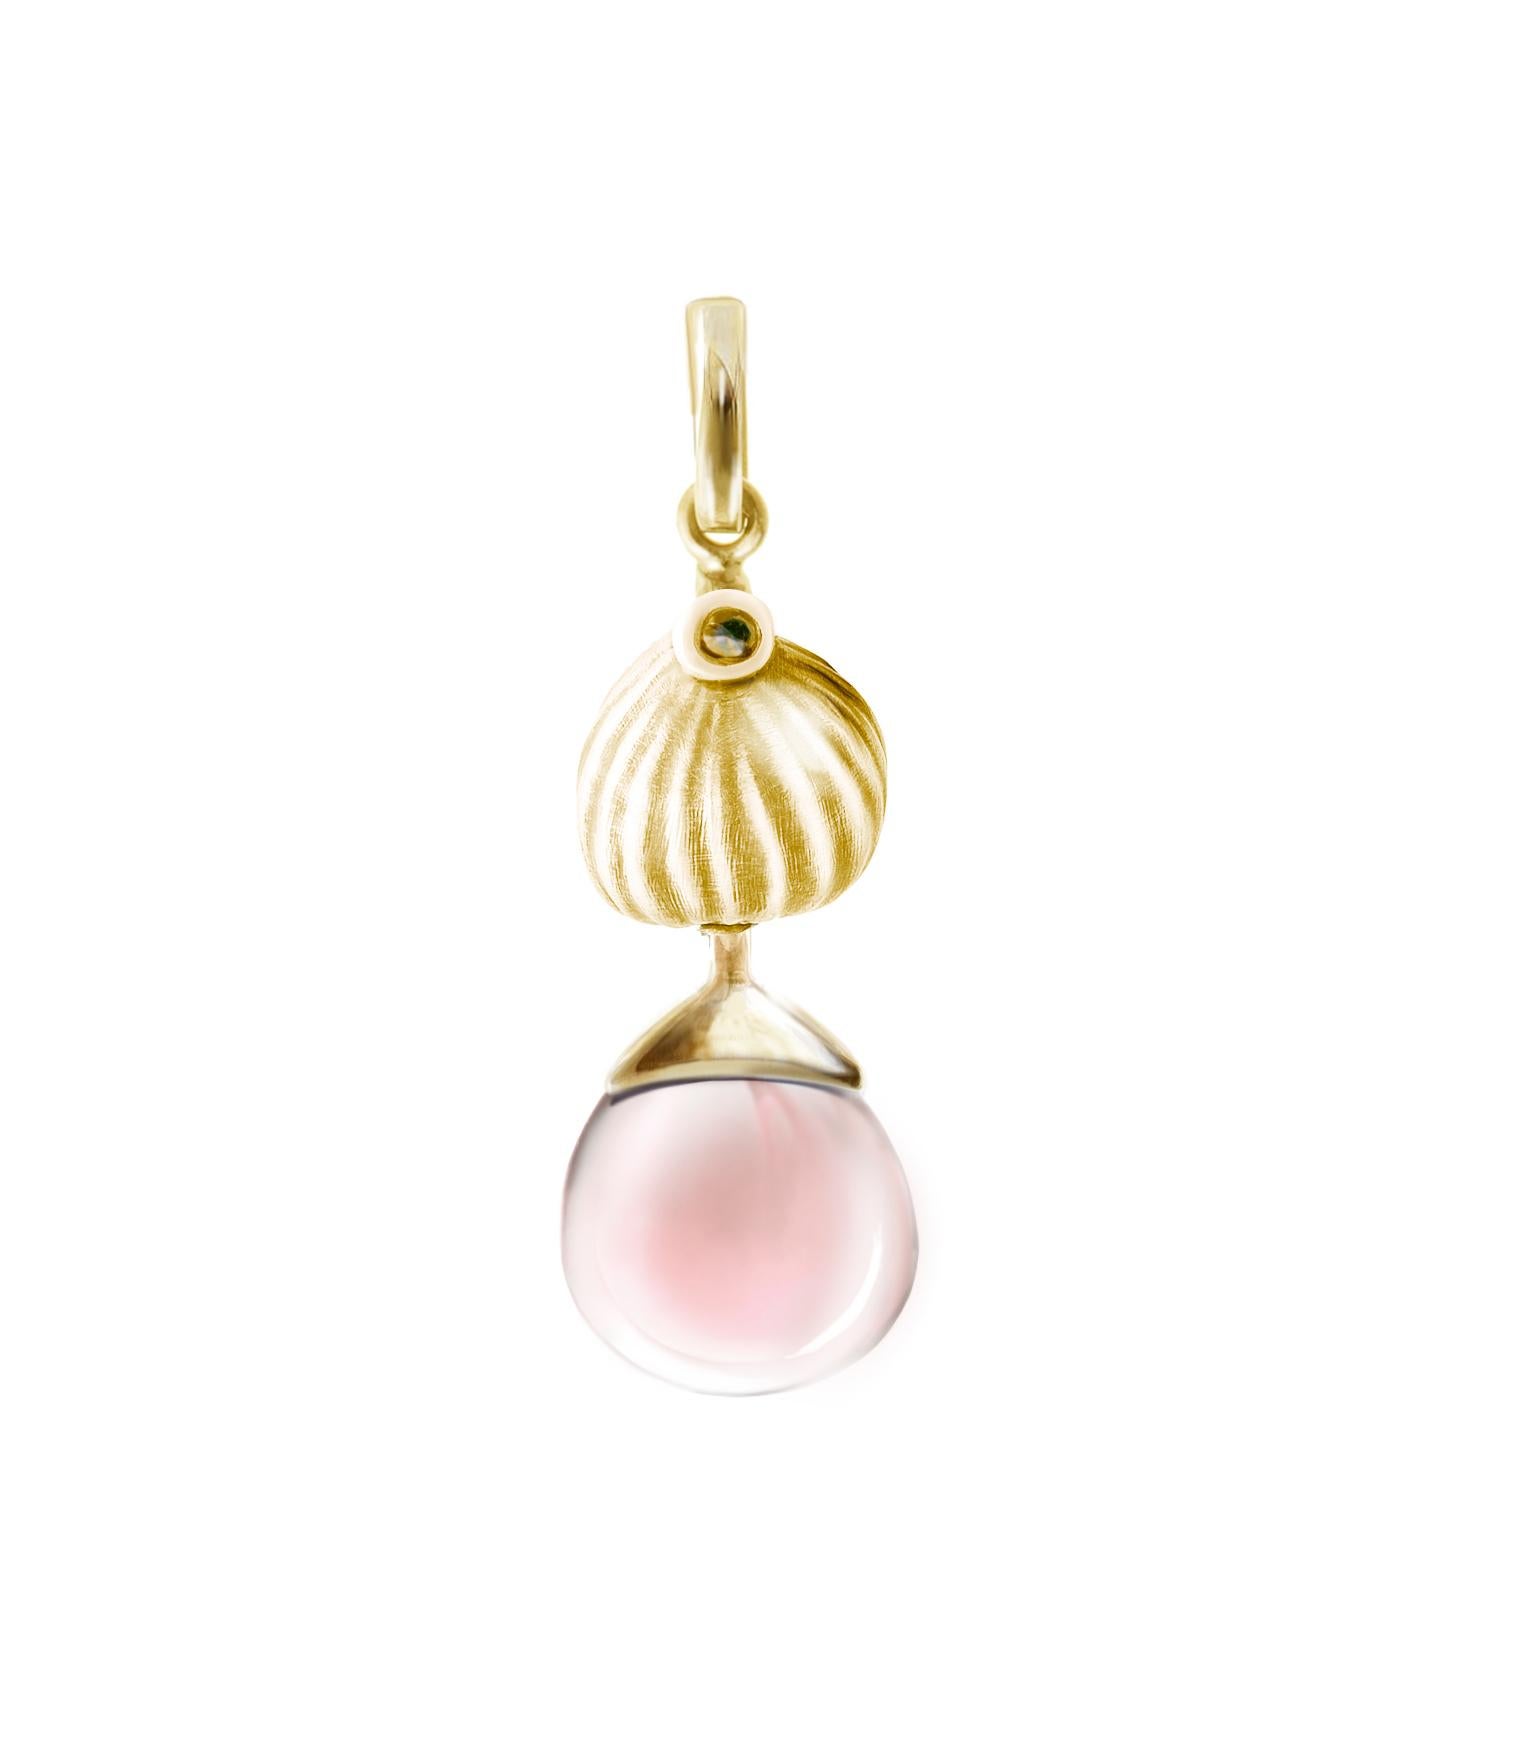 Contemporary Yellow Gold-Plated Sterling Silver Drop Pendant Necklace with Rose Quartz For Sale